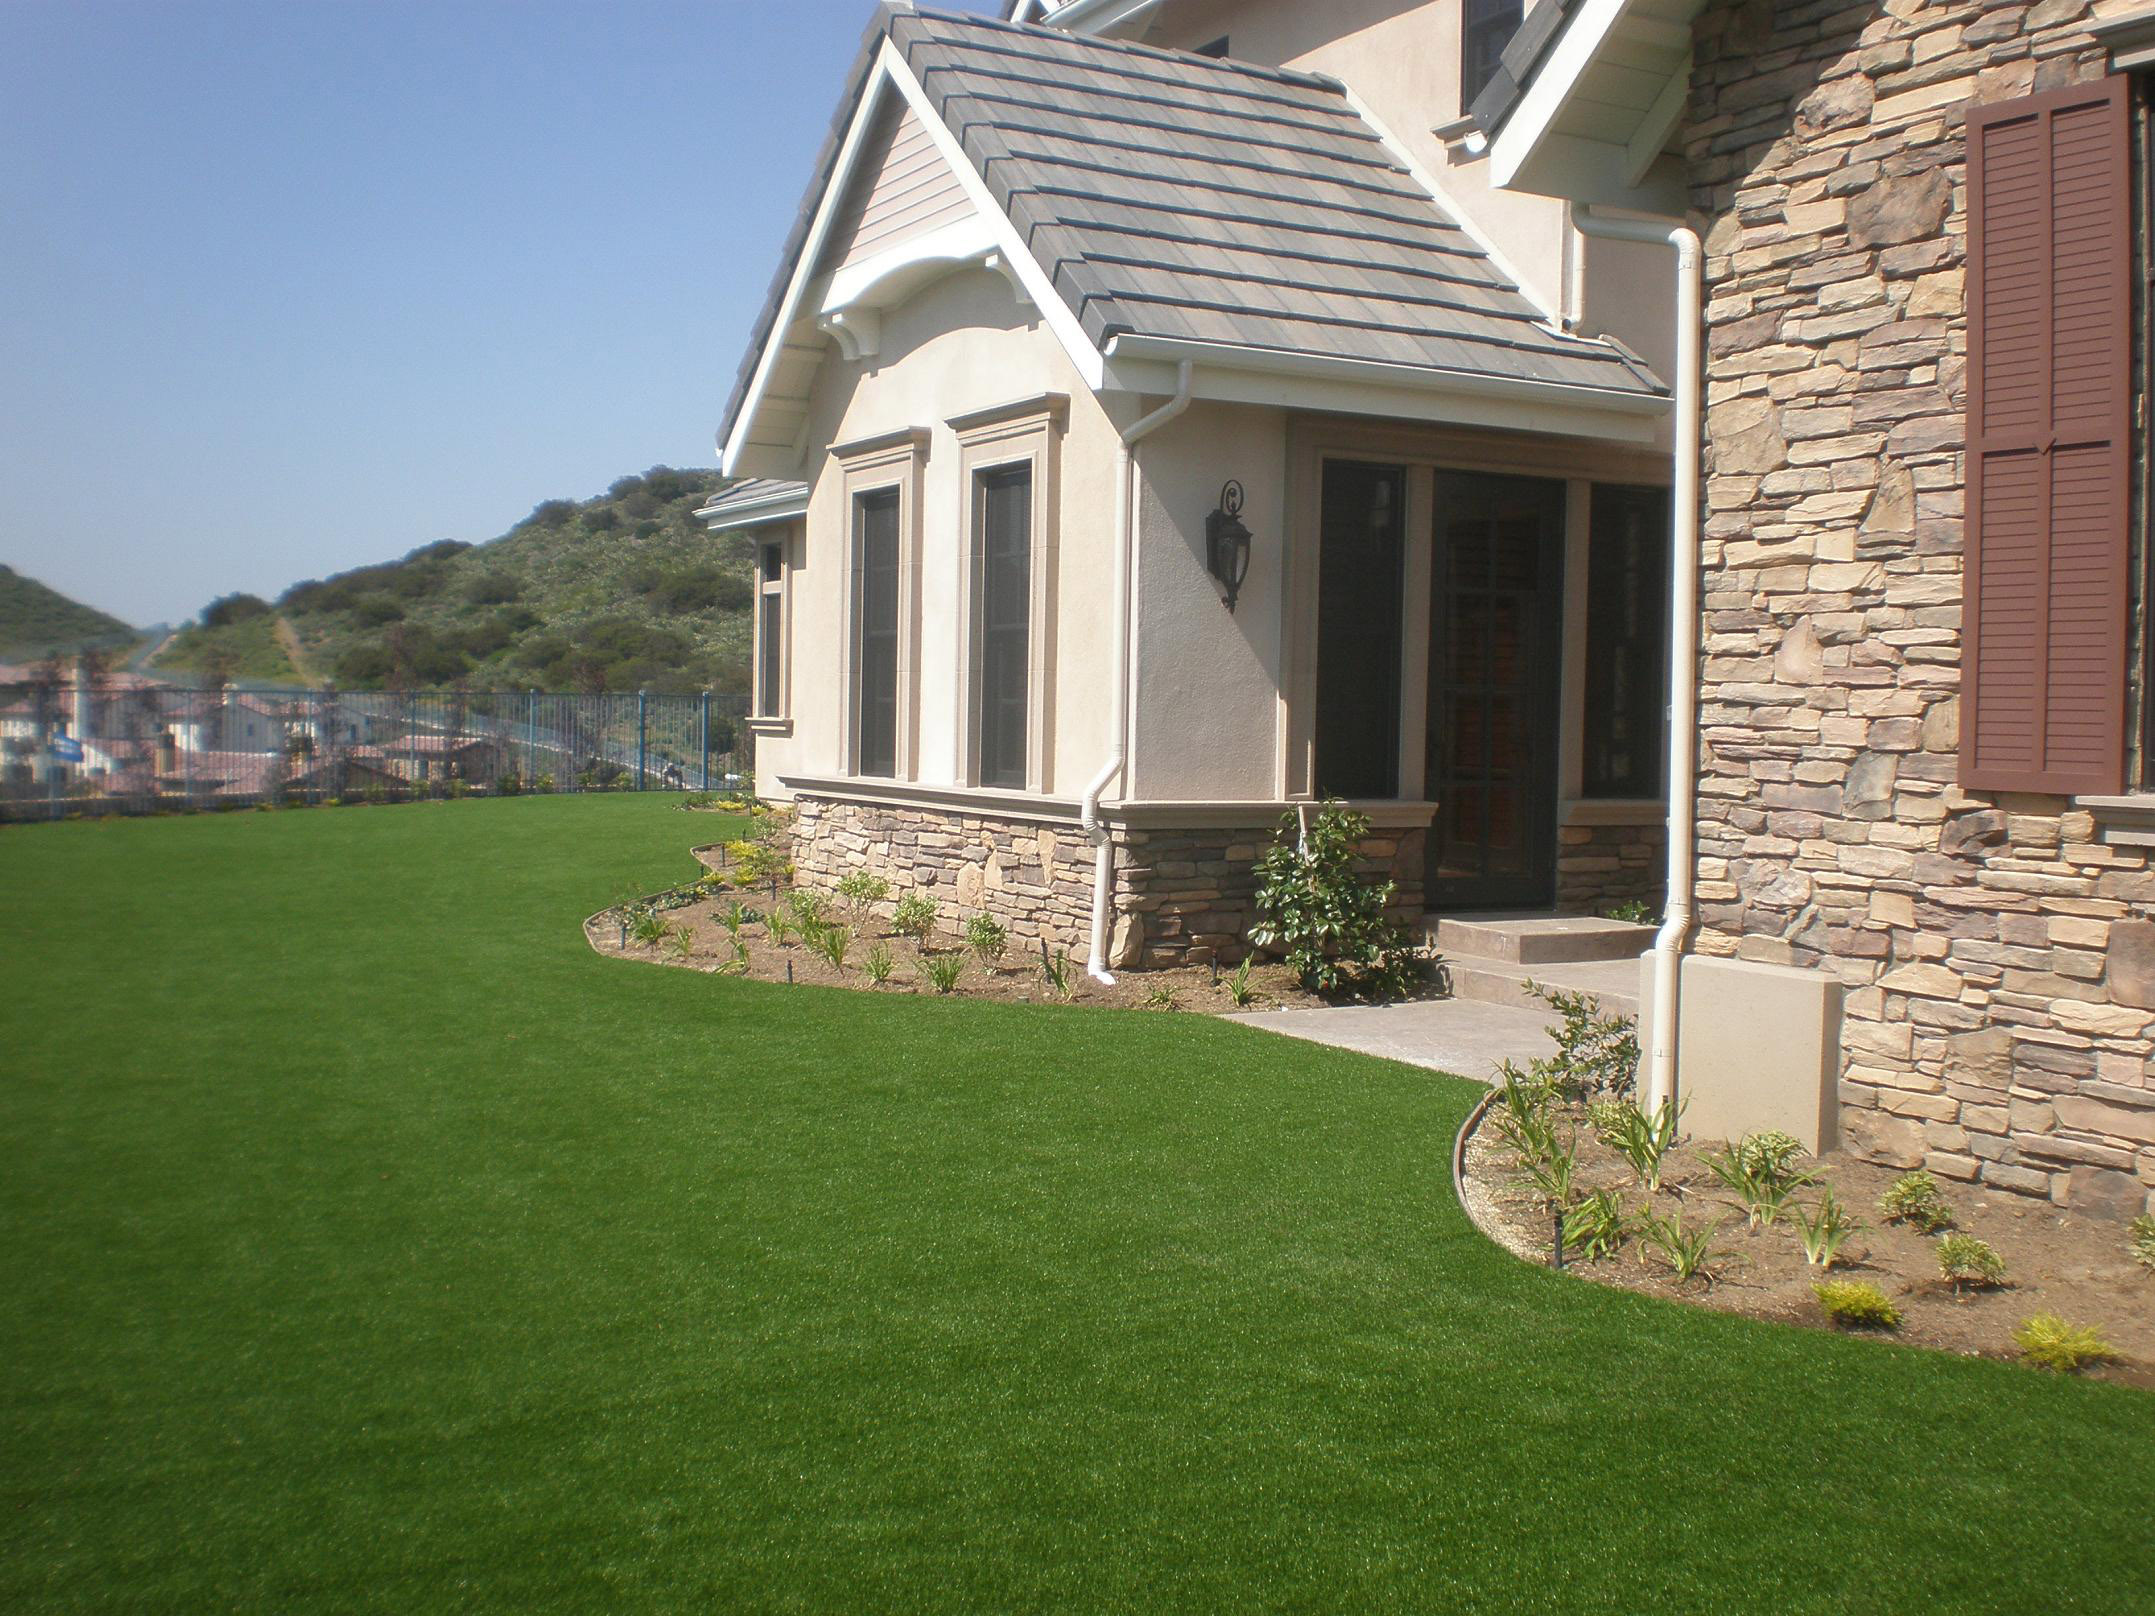 Synthetic grass landscape